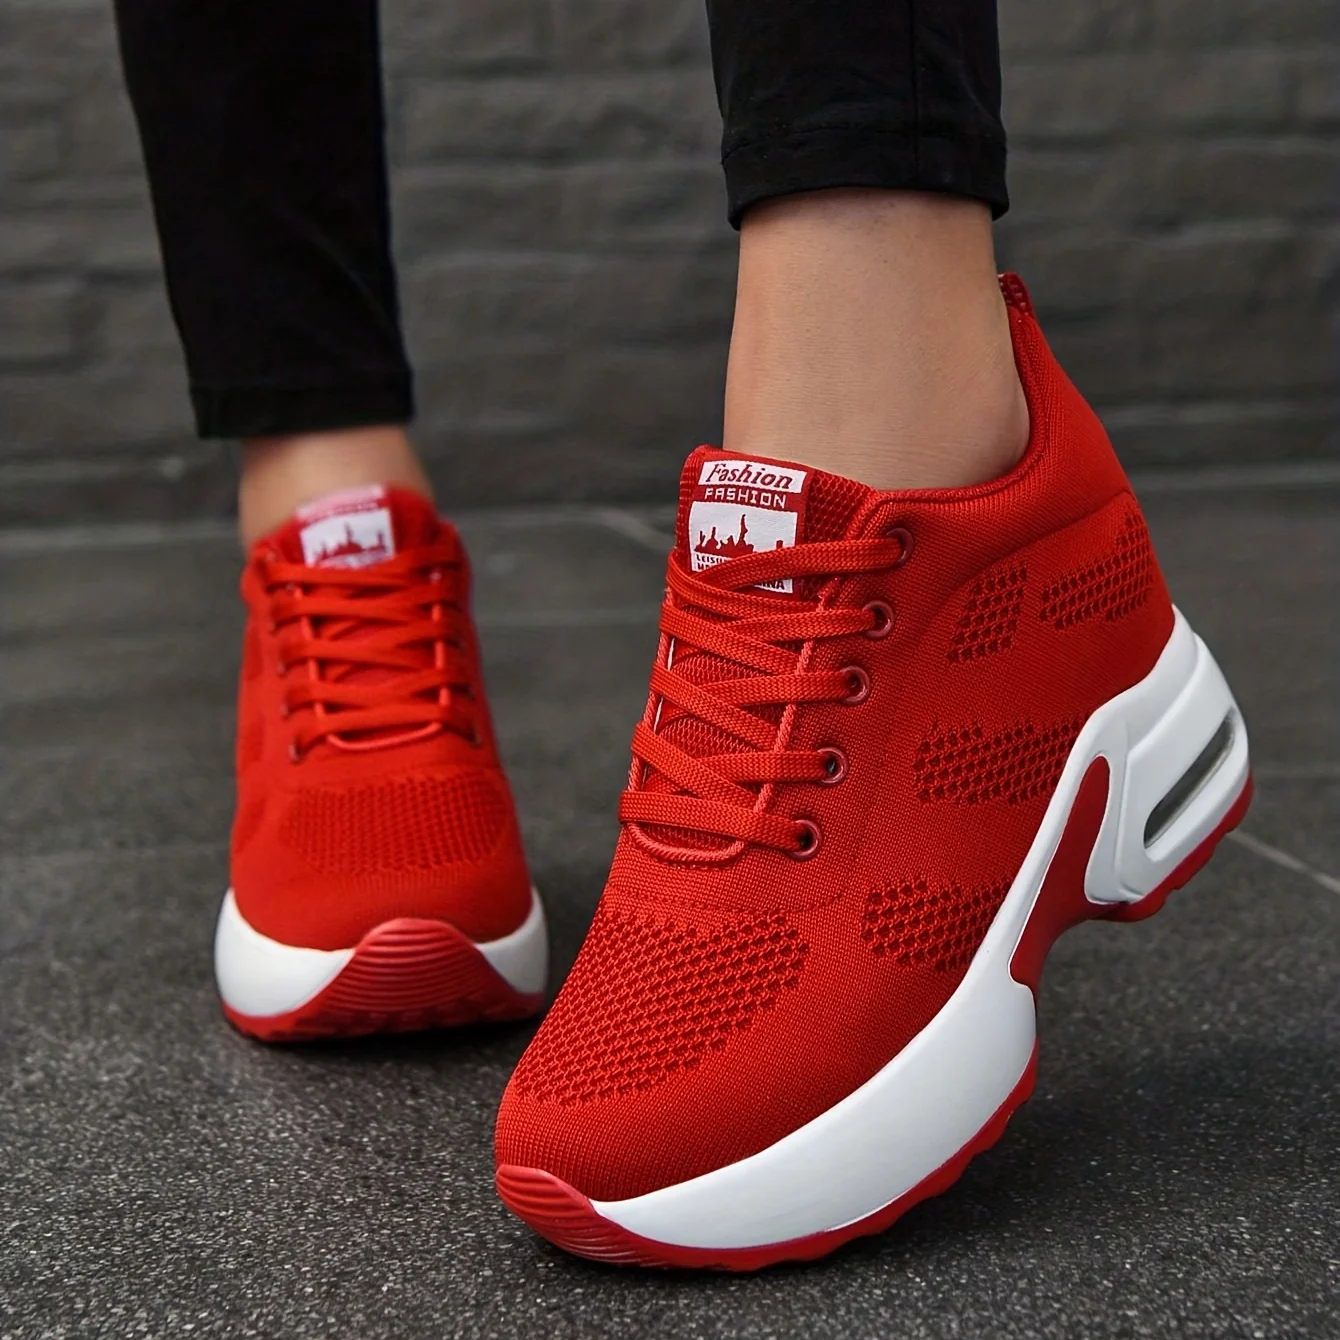 

Women Knit Lace Up Platform Shoes Air Cushion Sneakers 8 cm Height Wedge Sneakers Red Casual Shoes Zapatillas Mujer 1912 v